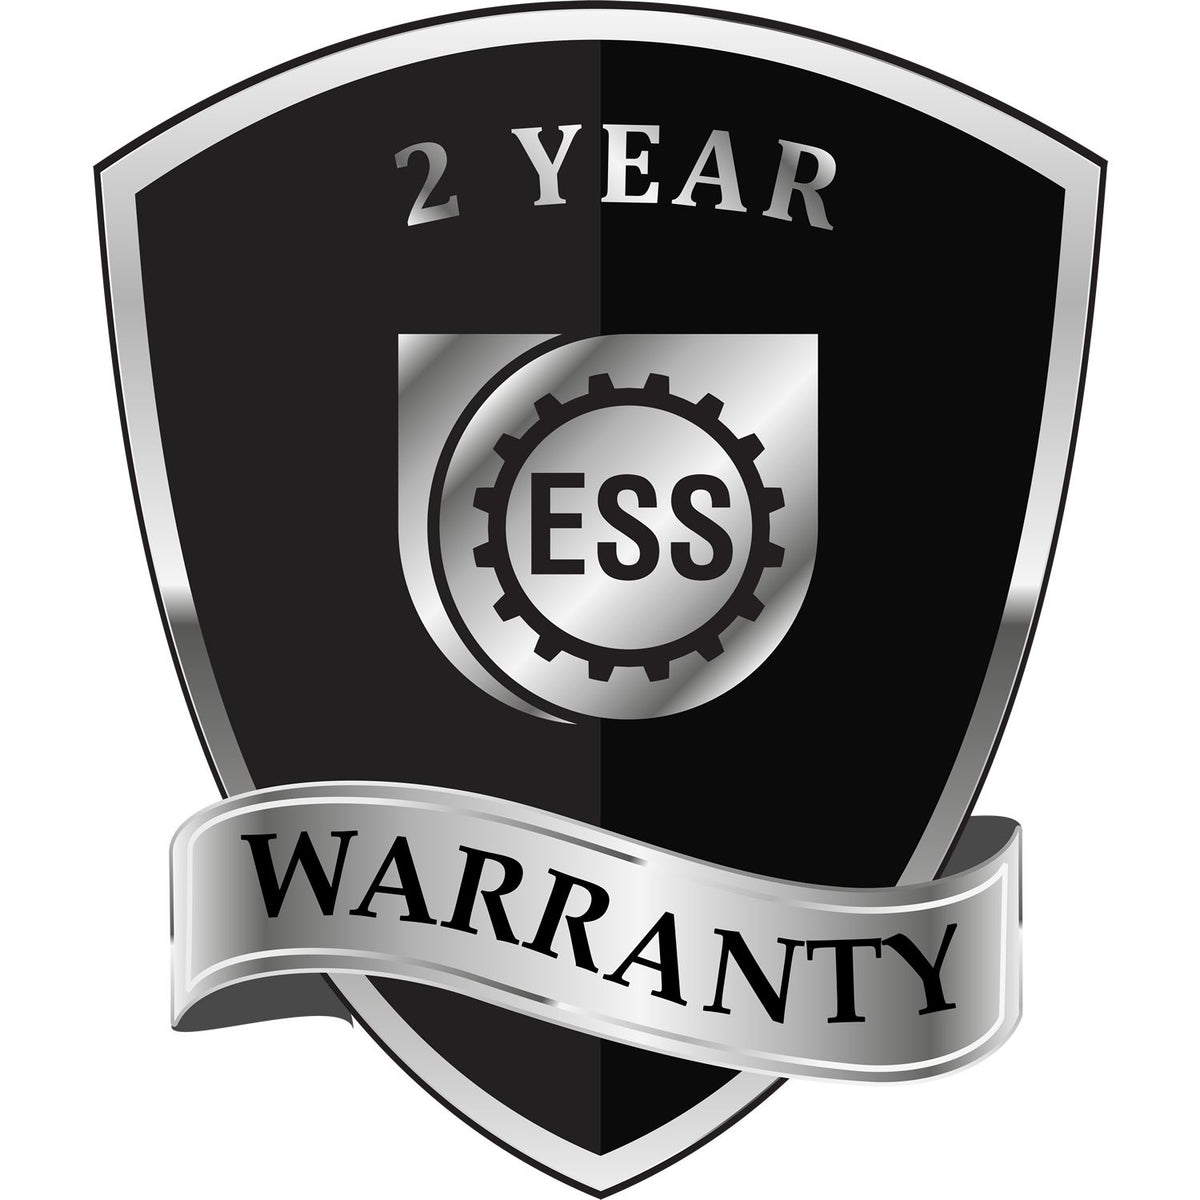 A badge or emblem showing a warranty icon for the Heavy Duty Cast Iron Georgia Land Surveyor Seal Embosser